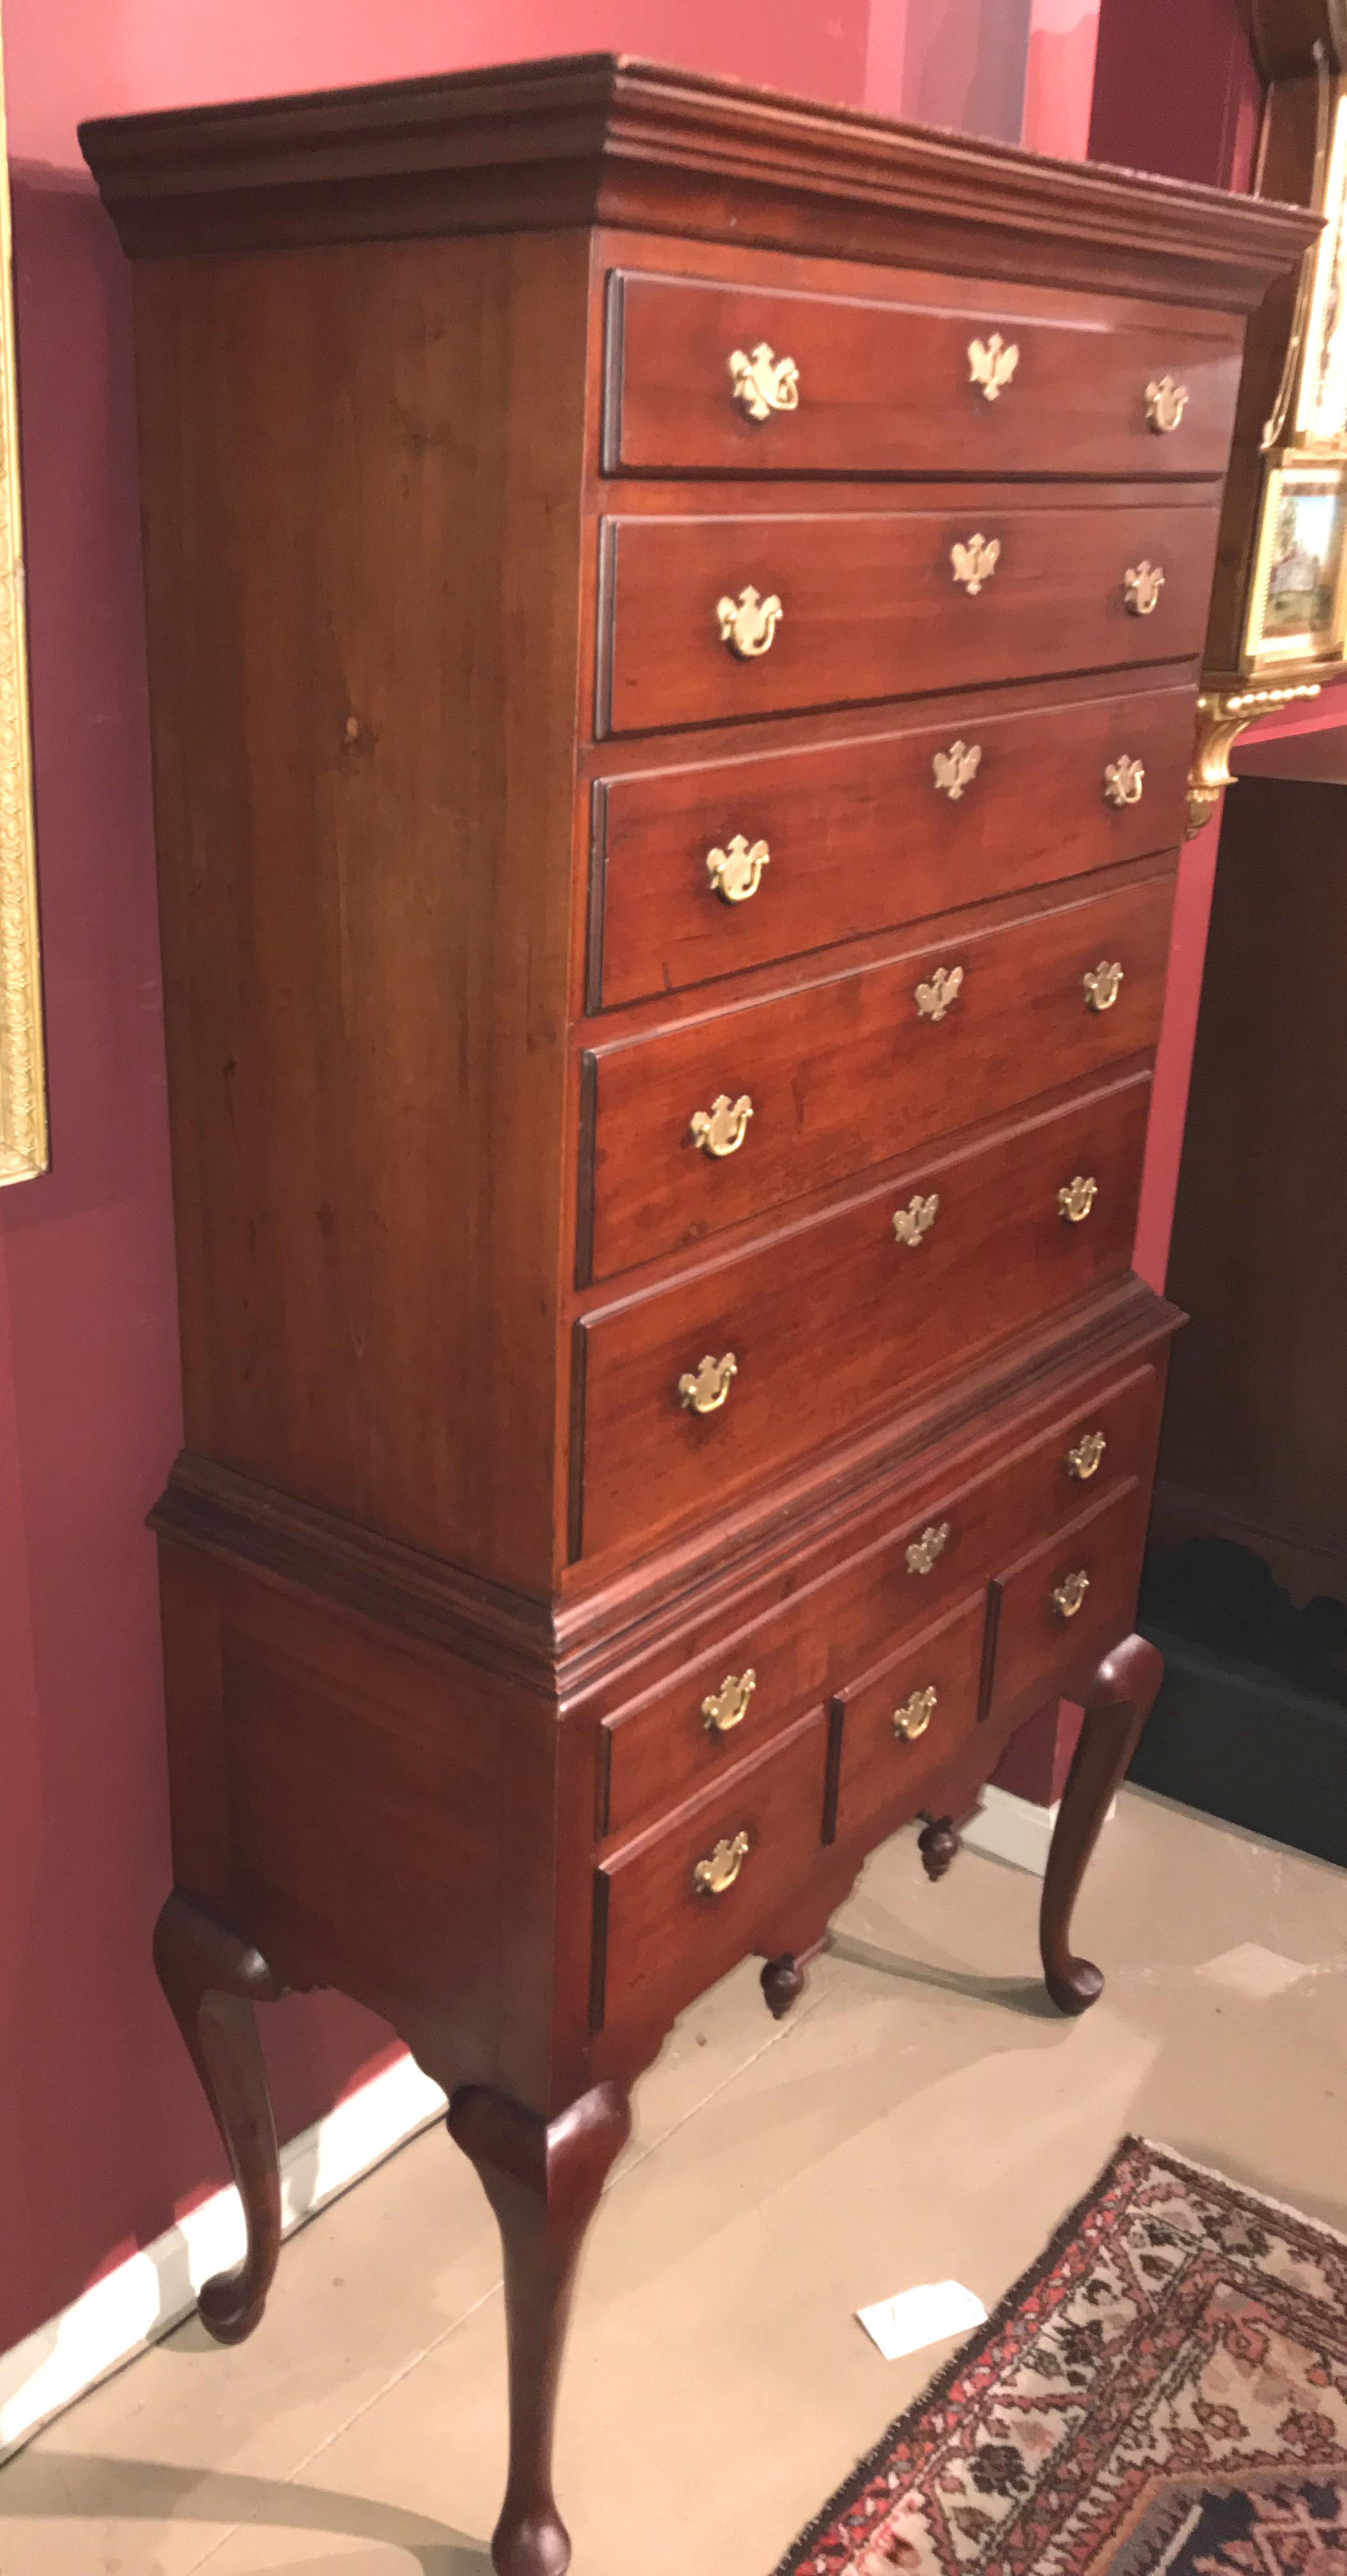 A fine two-part maple flat top highboy, its upper case with a molded cornice surmounting five graduated long drawers, over a lower case with a single long drawer over three fitted drawers, with a nicely carved skirt featuring two acorn drops, all